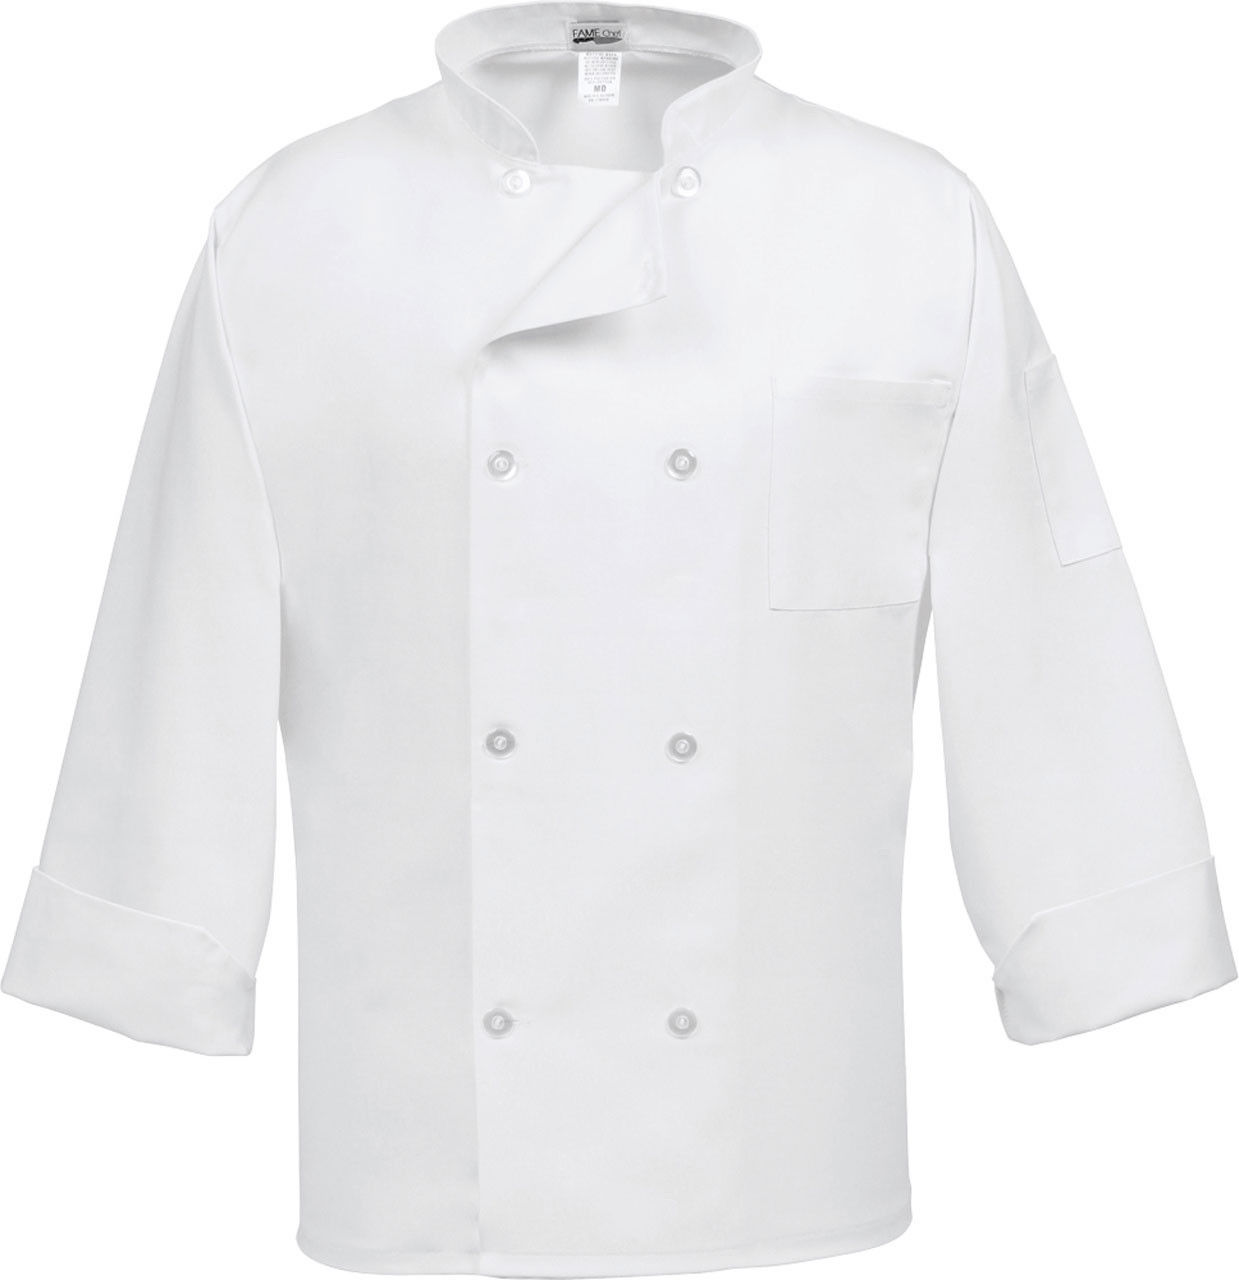 Is the chef coat button left or right and what's its material composition?